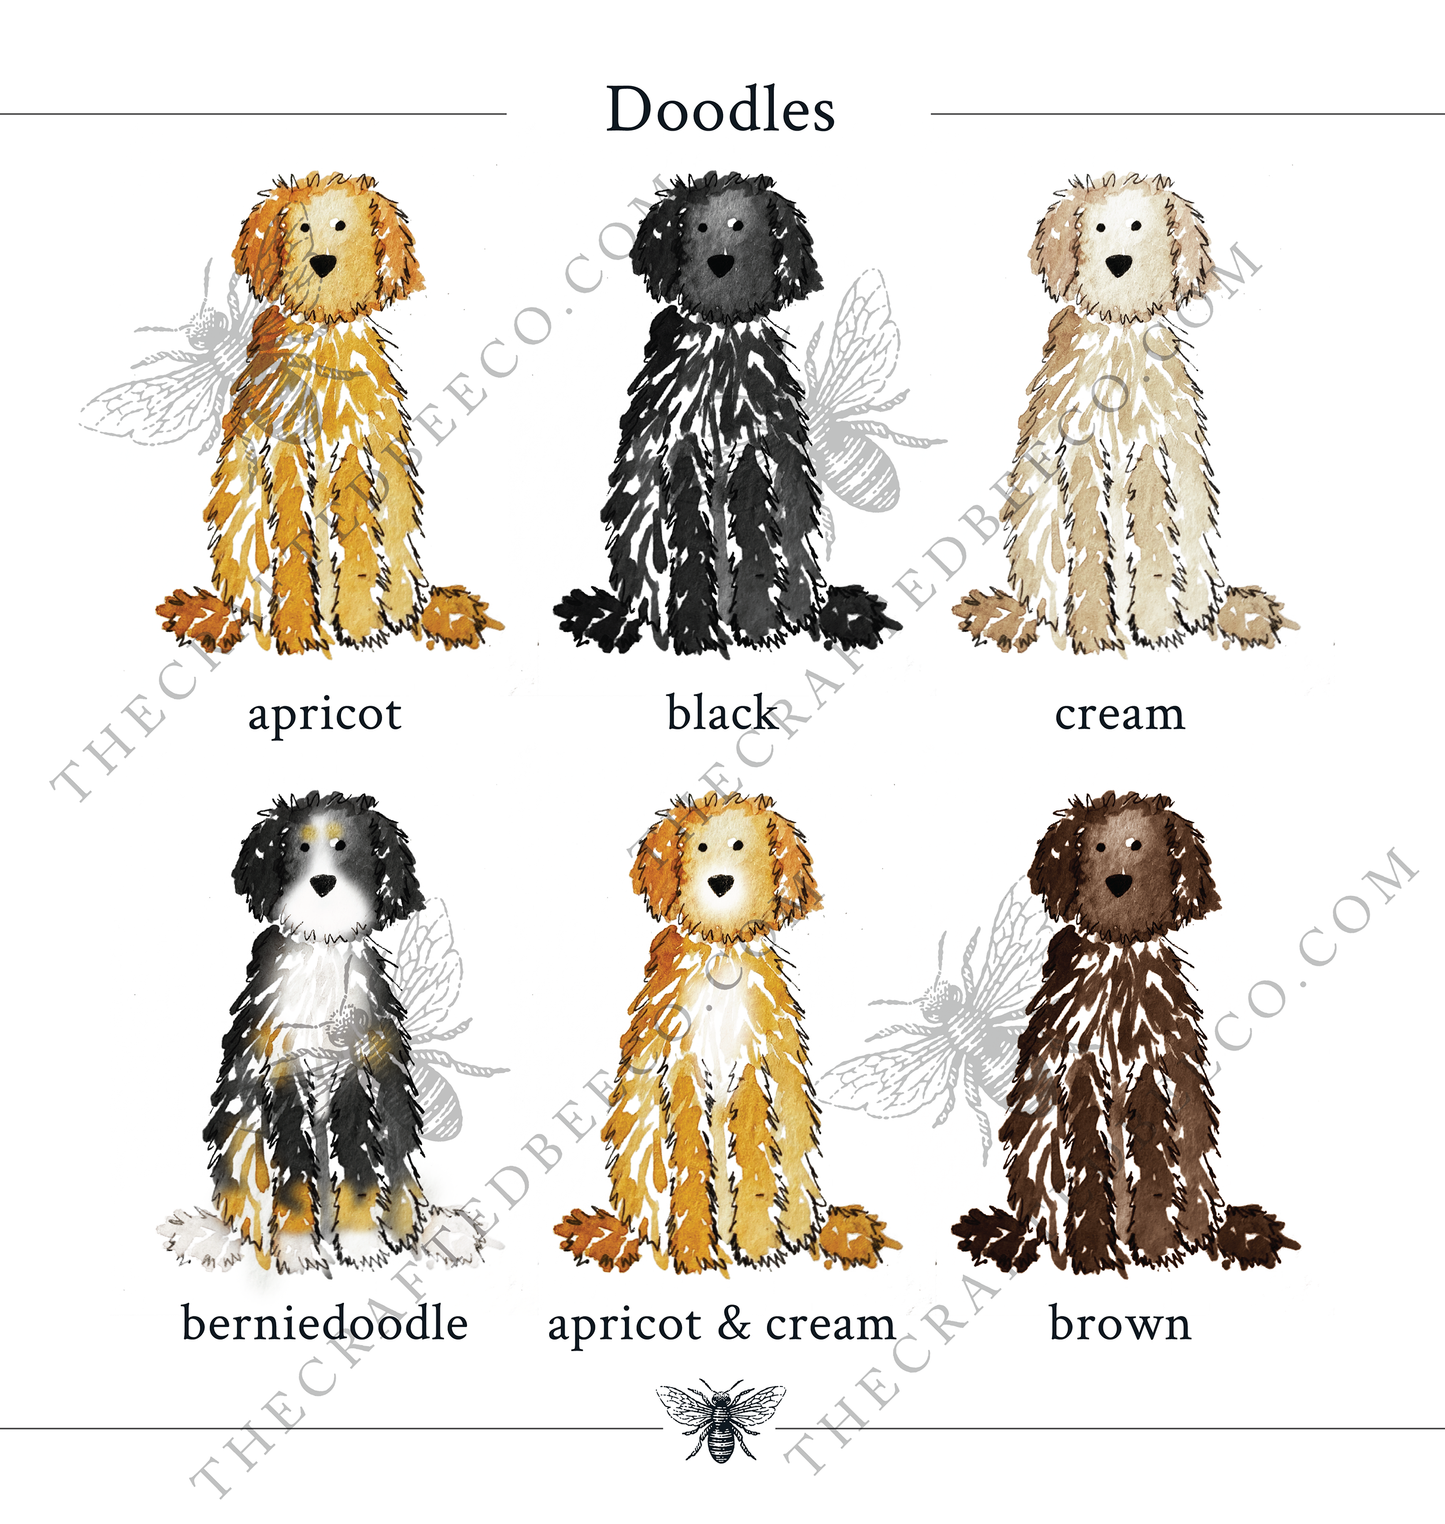 Personalized Goldendoodle Baby One Piece